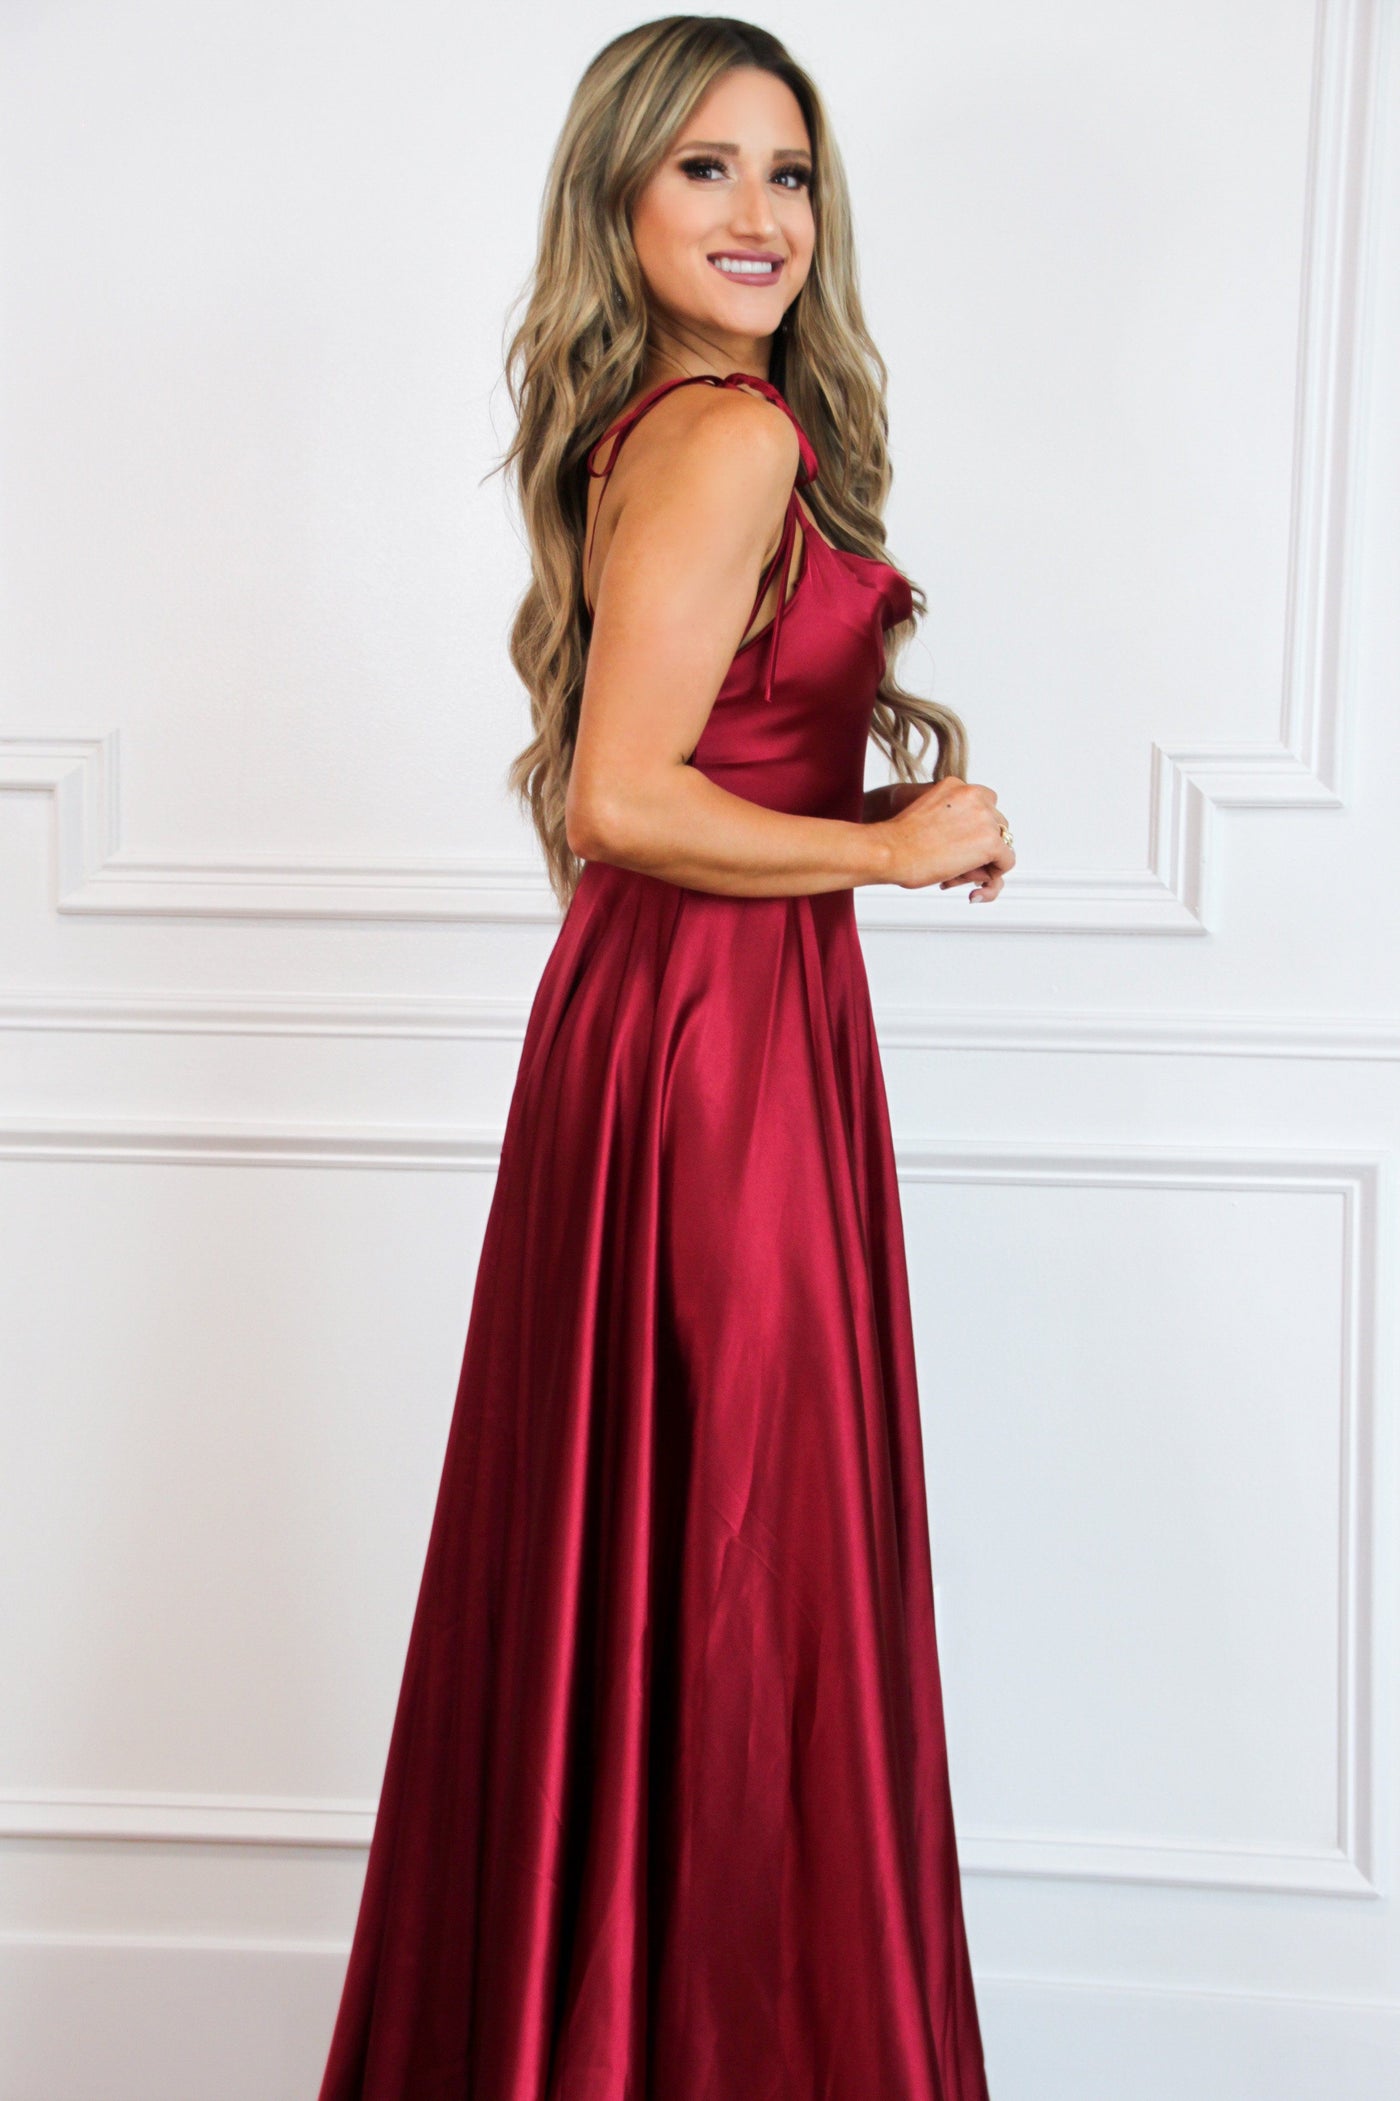 Tonight's the Night Satin Formal Dress: Burgundy - Bella and Bloom Boutique